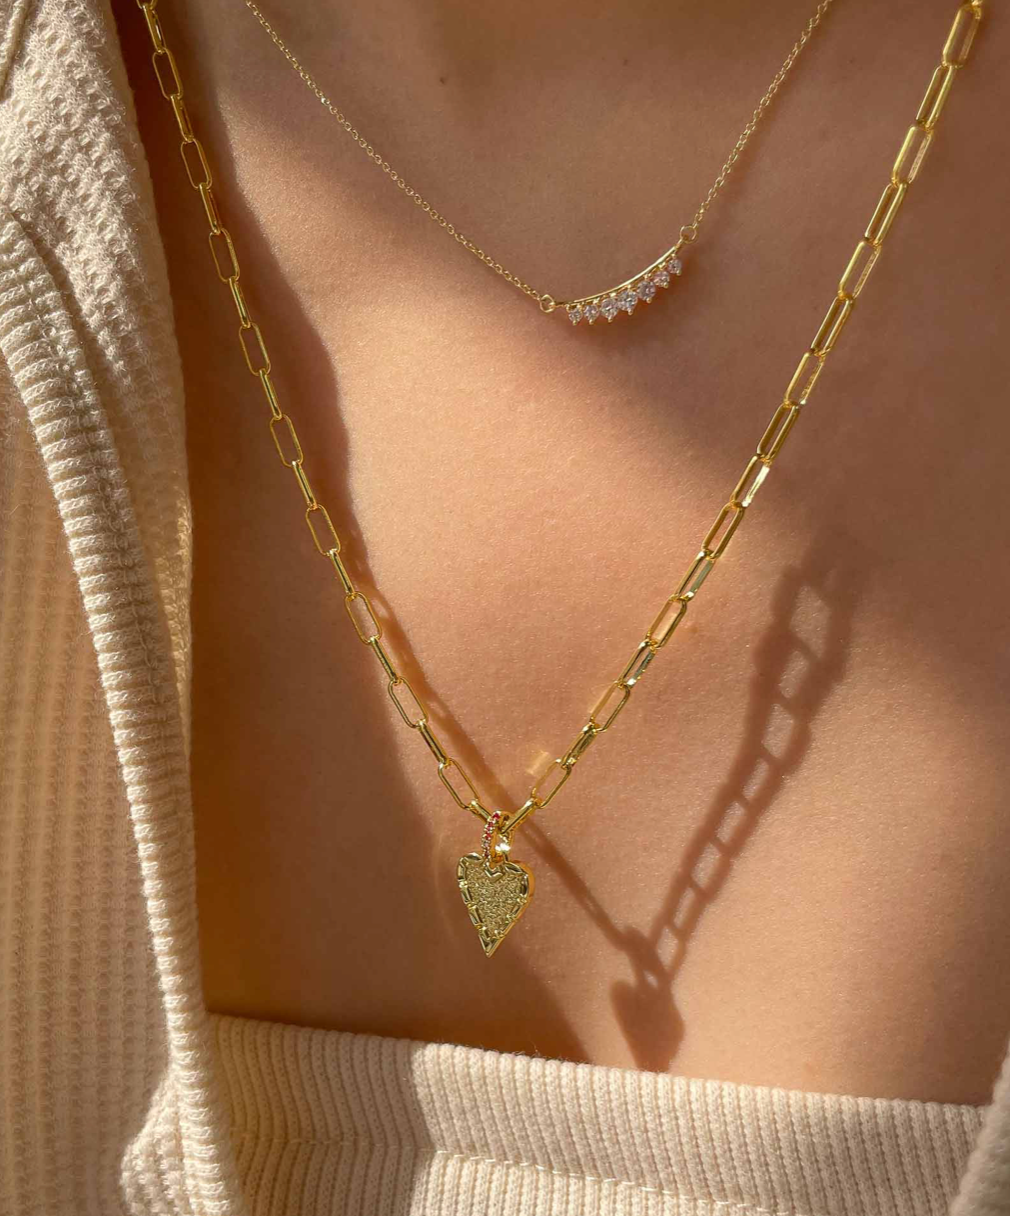 Belle Heart Chain Necklace